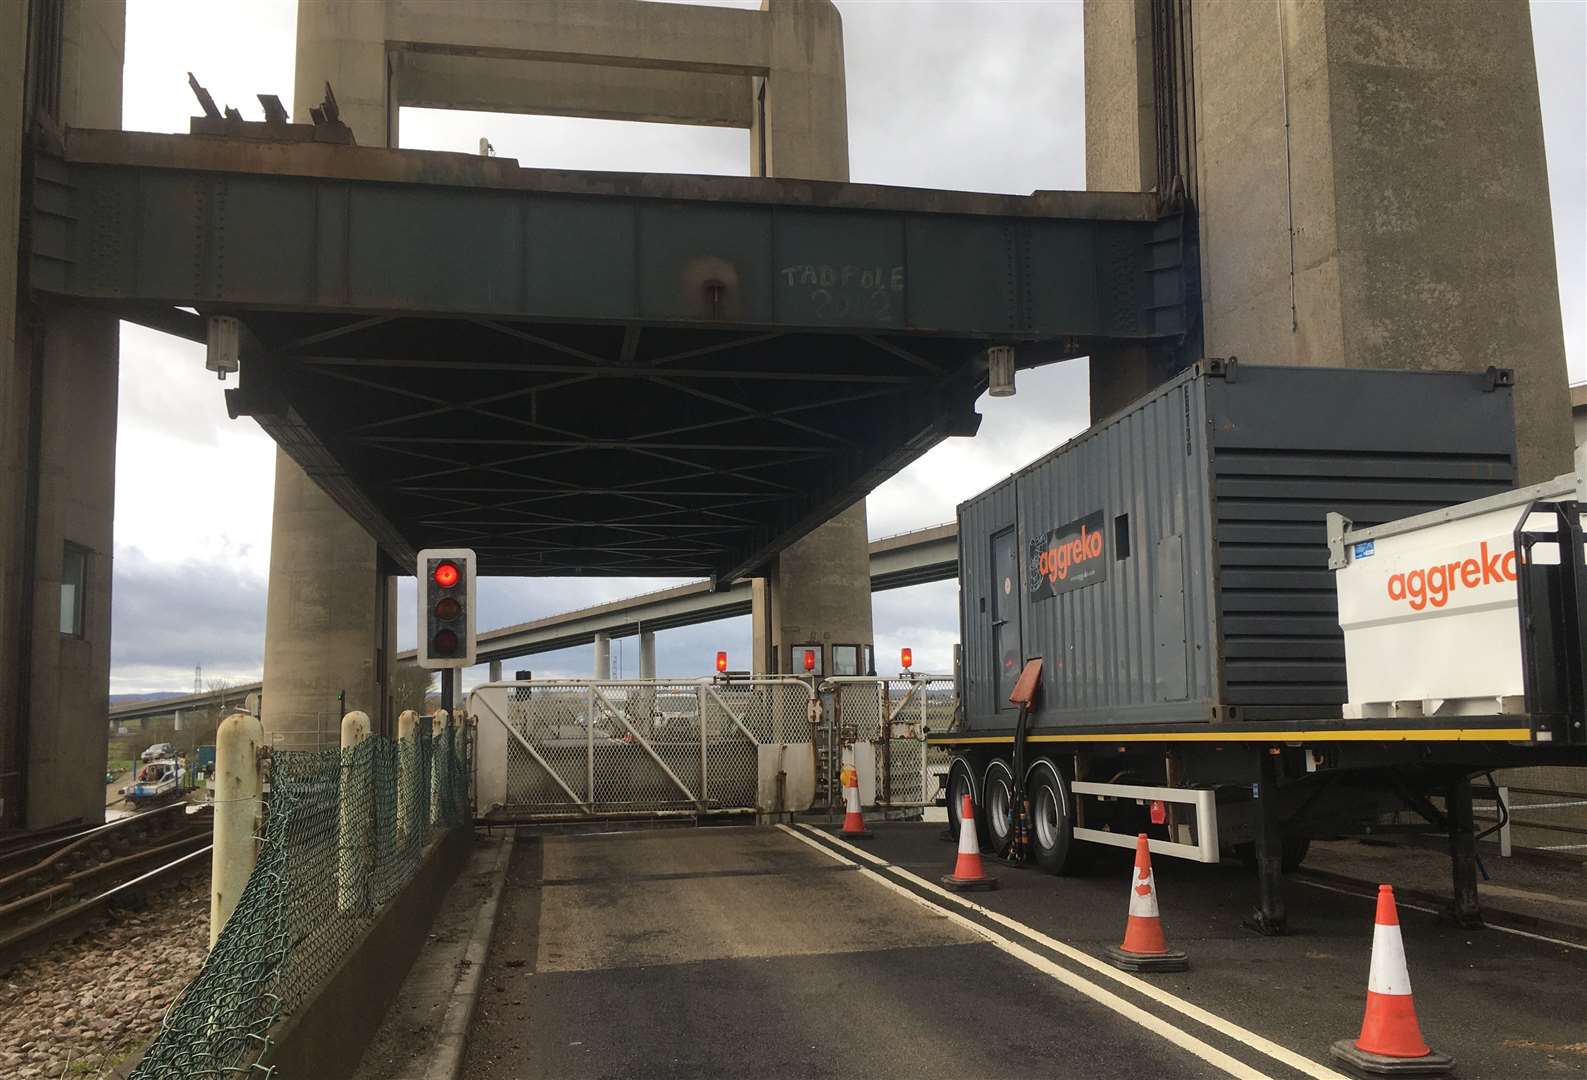 The temporary generator which lifts the Kingsferry Bridge on the Isle of Sheppey (30047575)